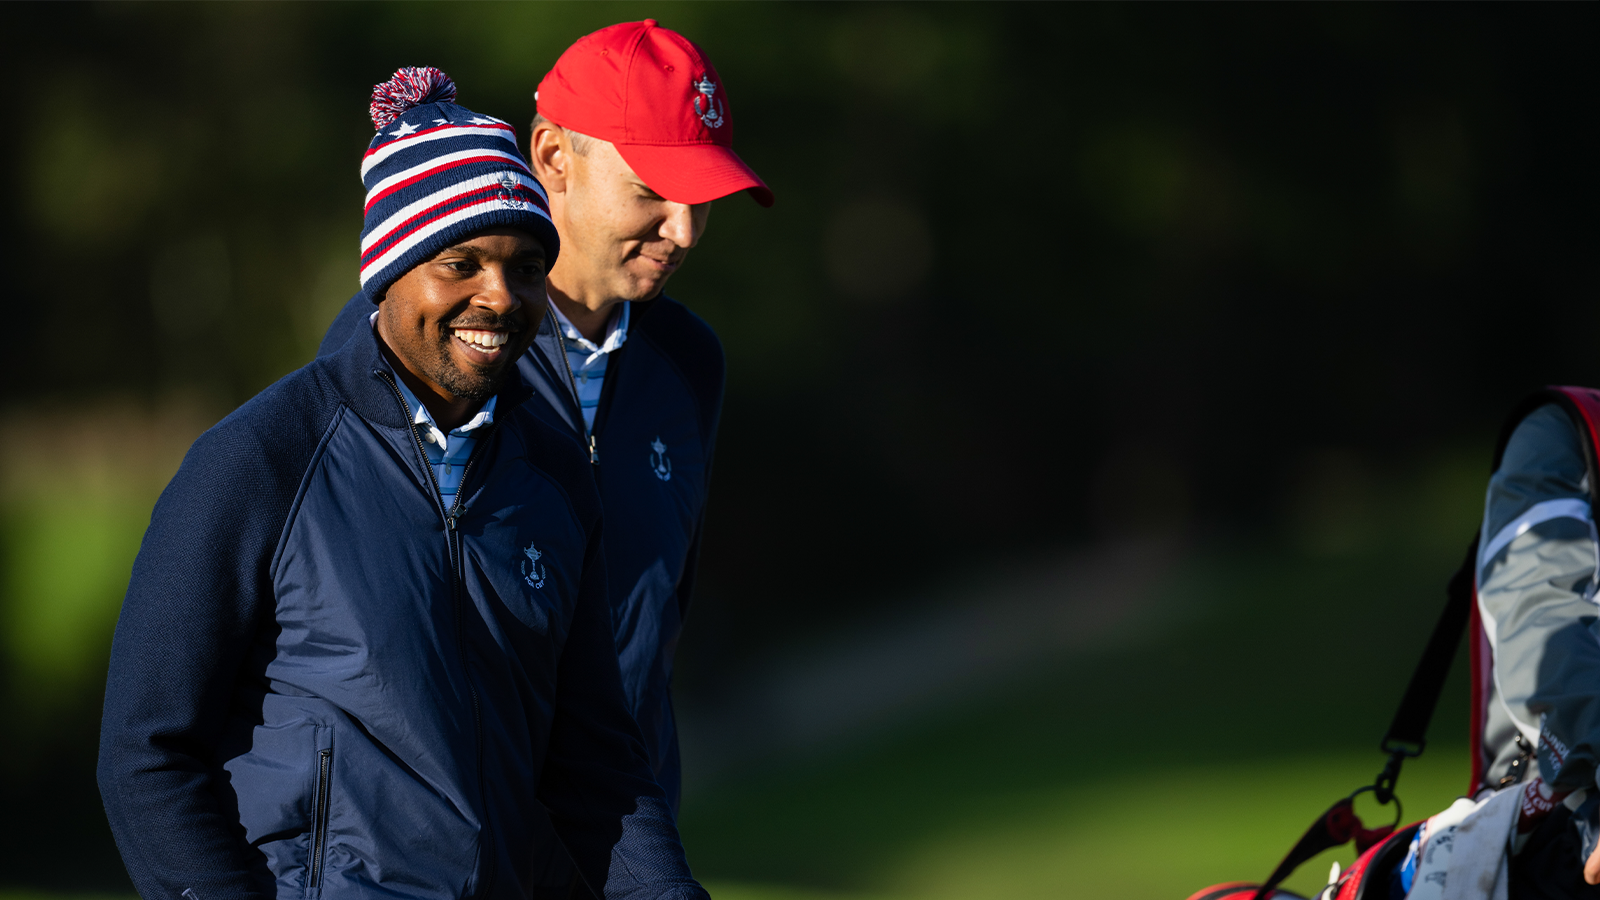 Wyatt Worthington II of the United States and Jared Jones of the United States during afternoon foursome matches for the 30th PGA Cup at Foxhills Golf Club on September 16, 2022 in Ottershaw, England. (Photo by Matthew Harris/PGA of America)